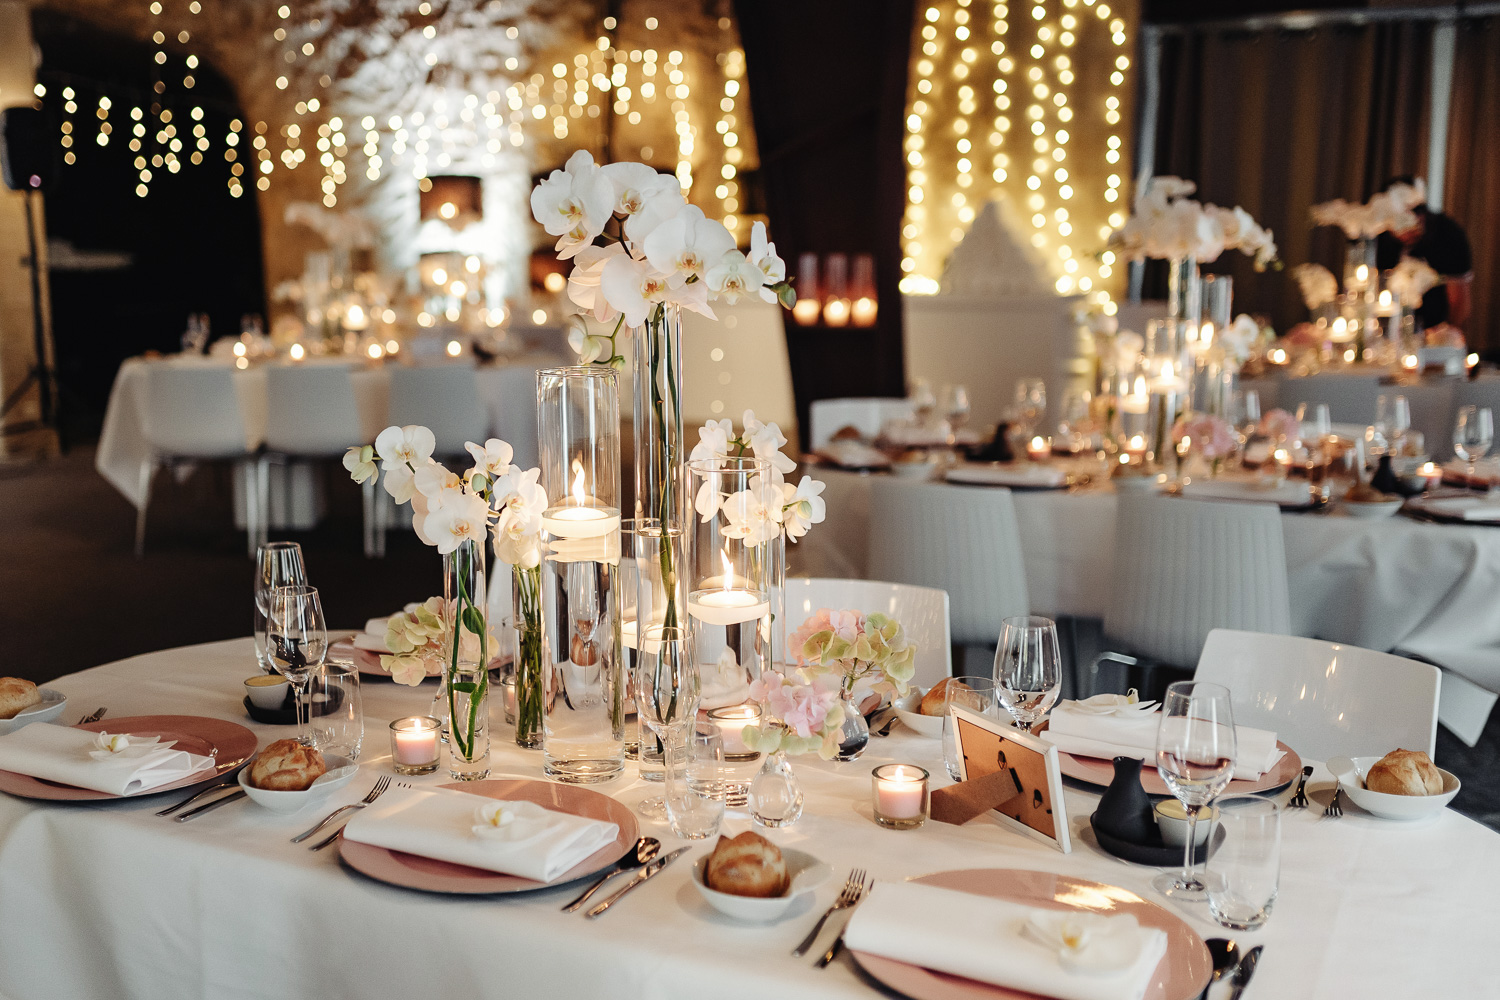 Bruiloft decoratie. Plates laying down at table with names of guests, candle lights and vases, white orchids and light girlands